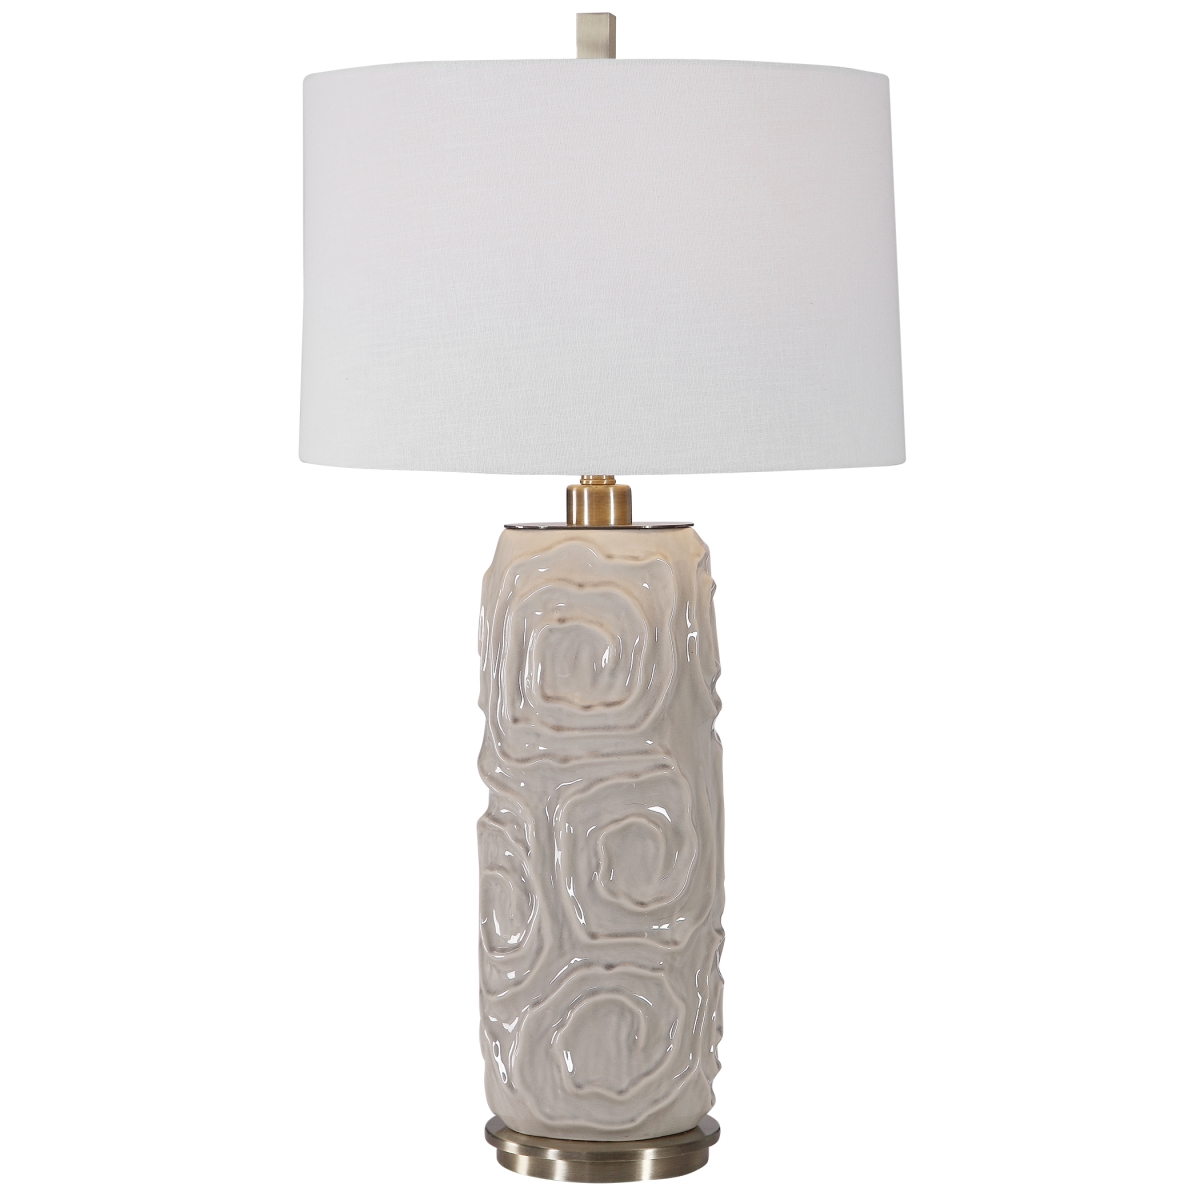 Picture of 212 Main 26379-1 Zade Warm Gray Table Lamp